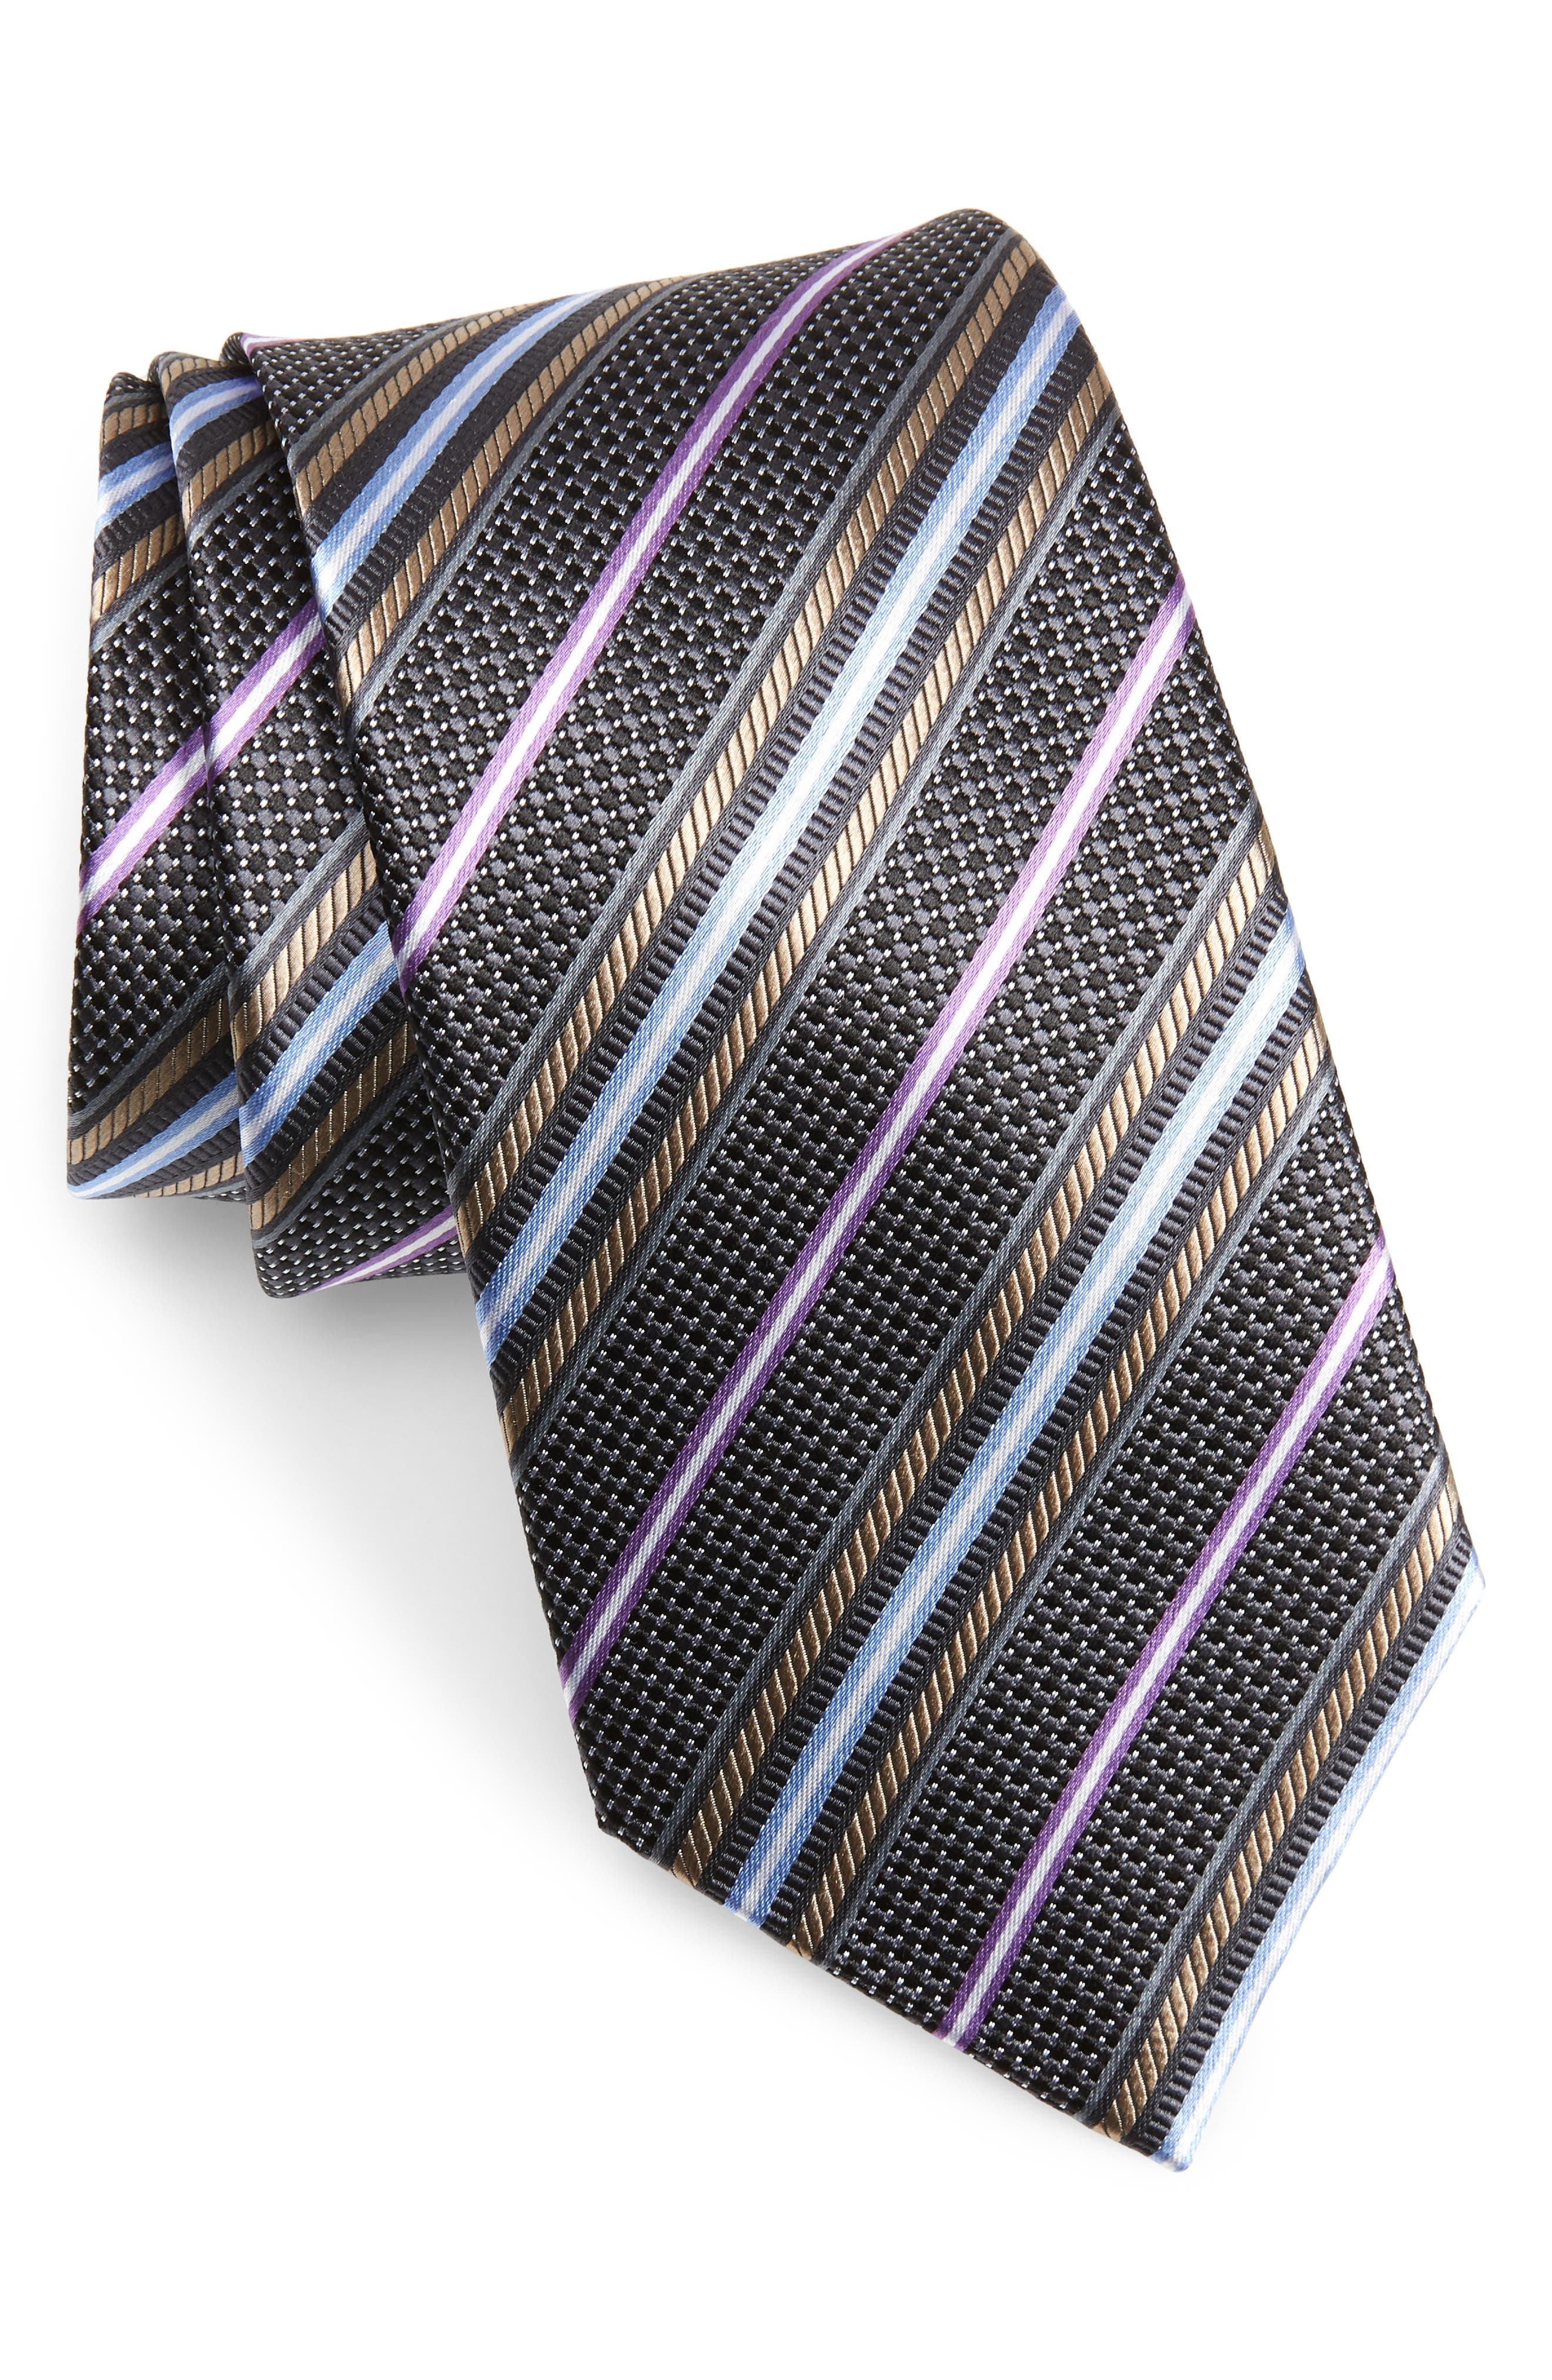 blush ties for sale